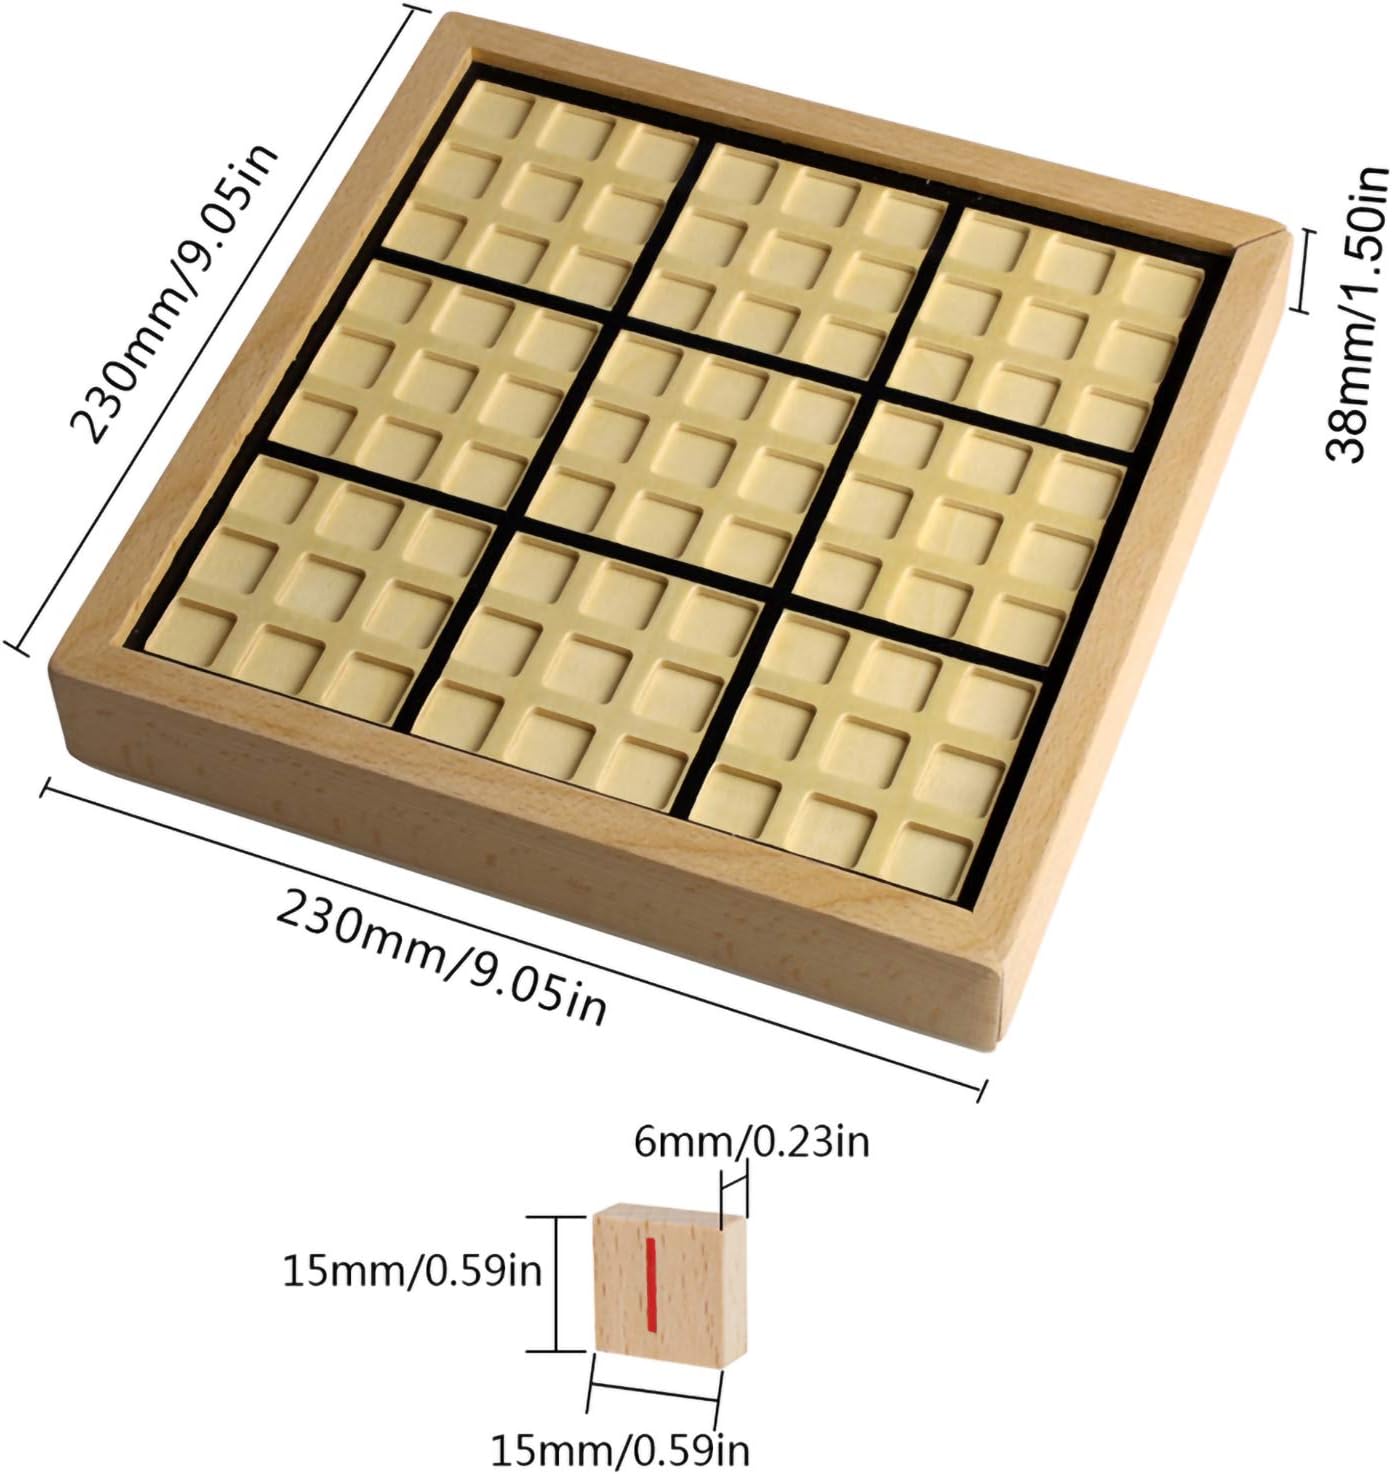 Wooden Sudoku Puzzle Board Game with Drawer SD-02 (Black)